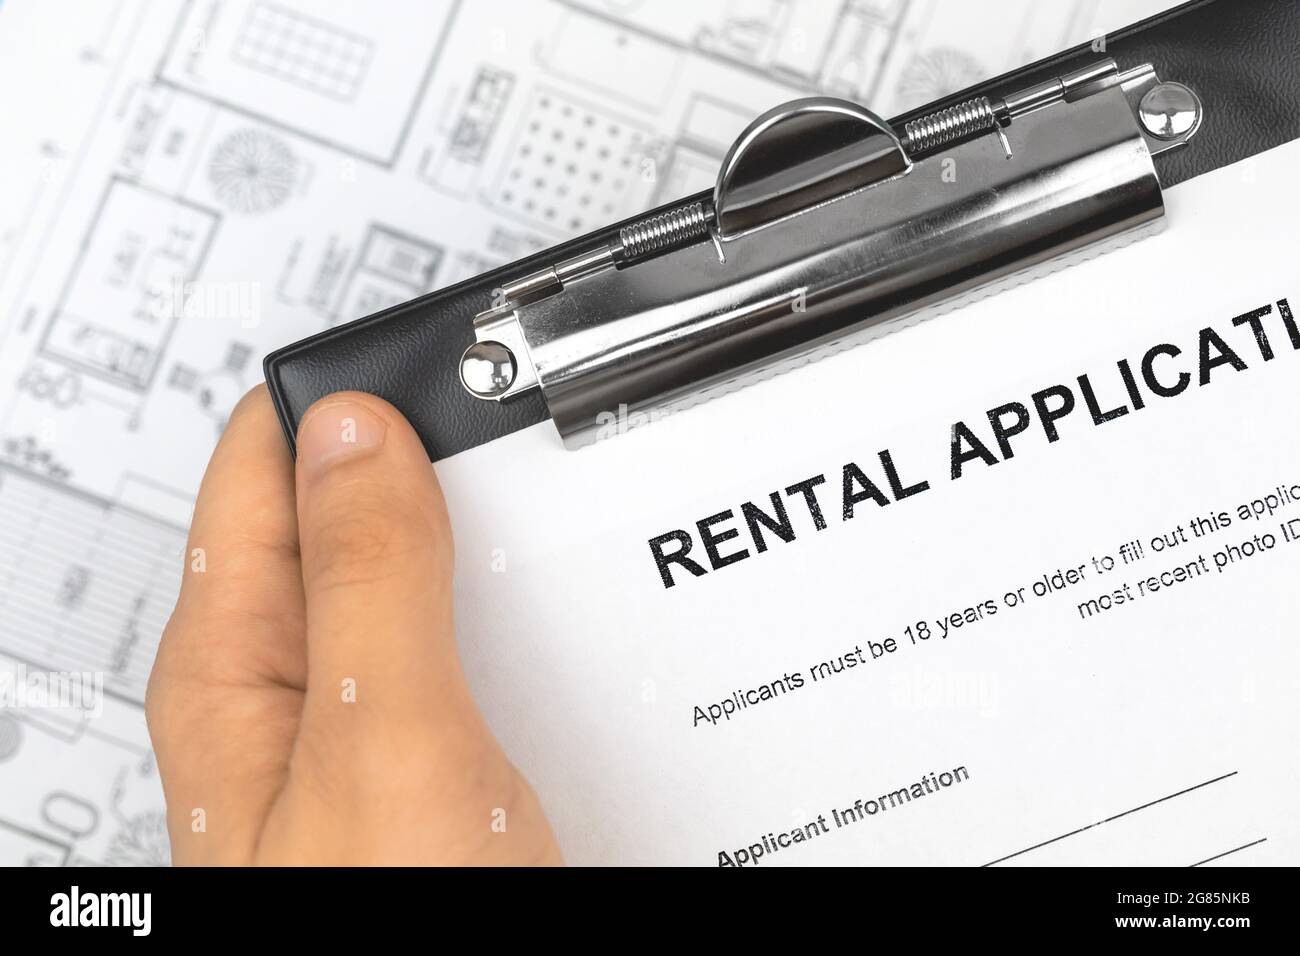 18 Printable apartment application process how long Forms and